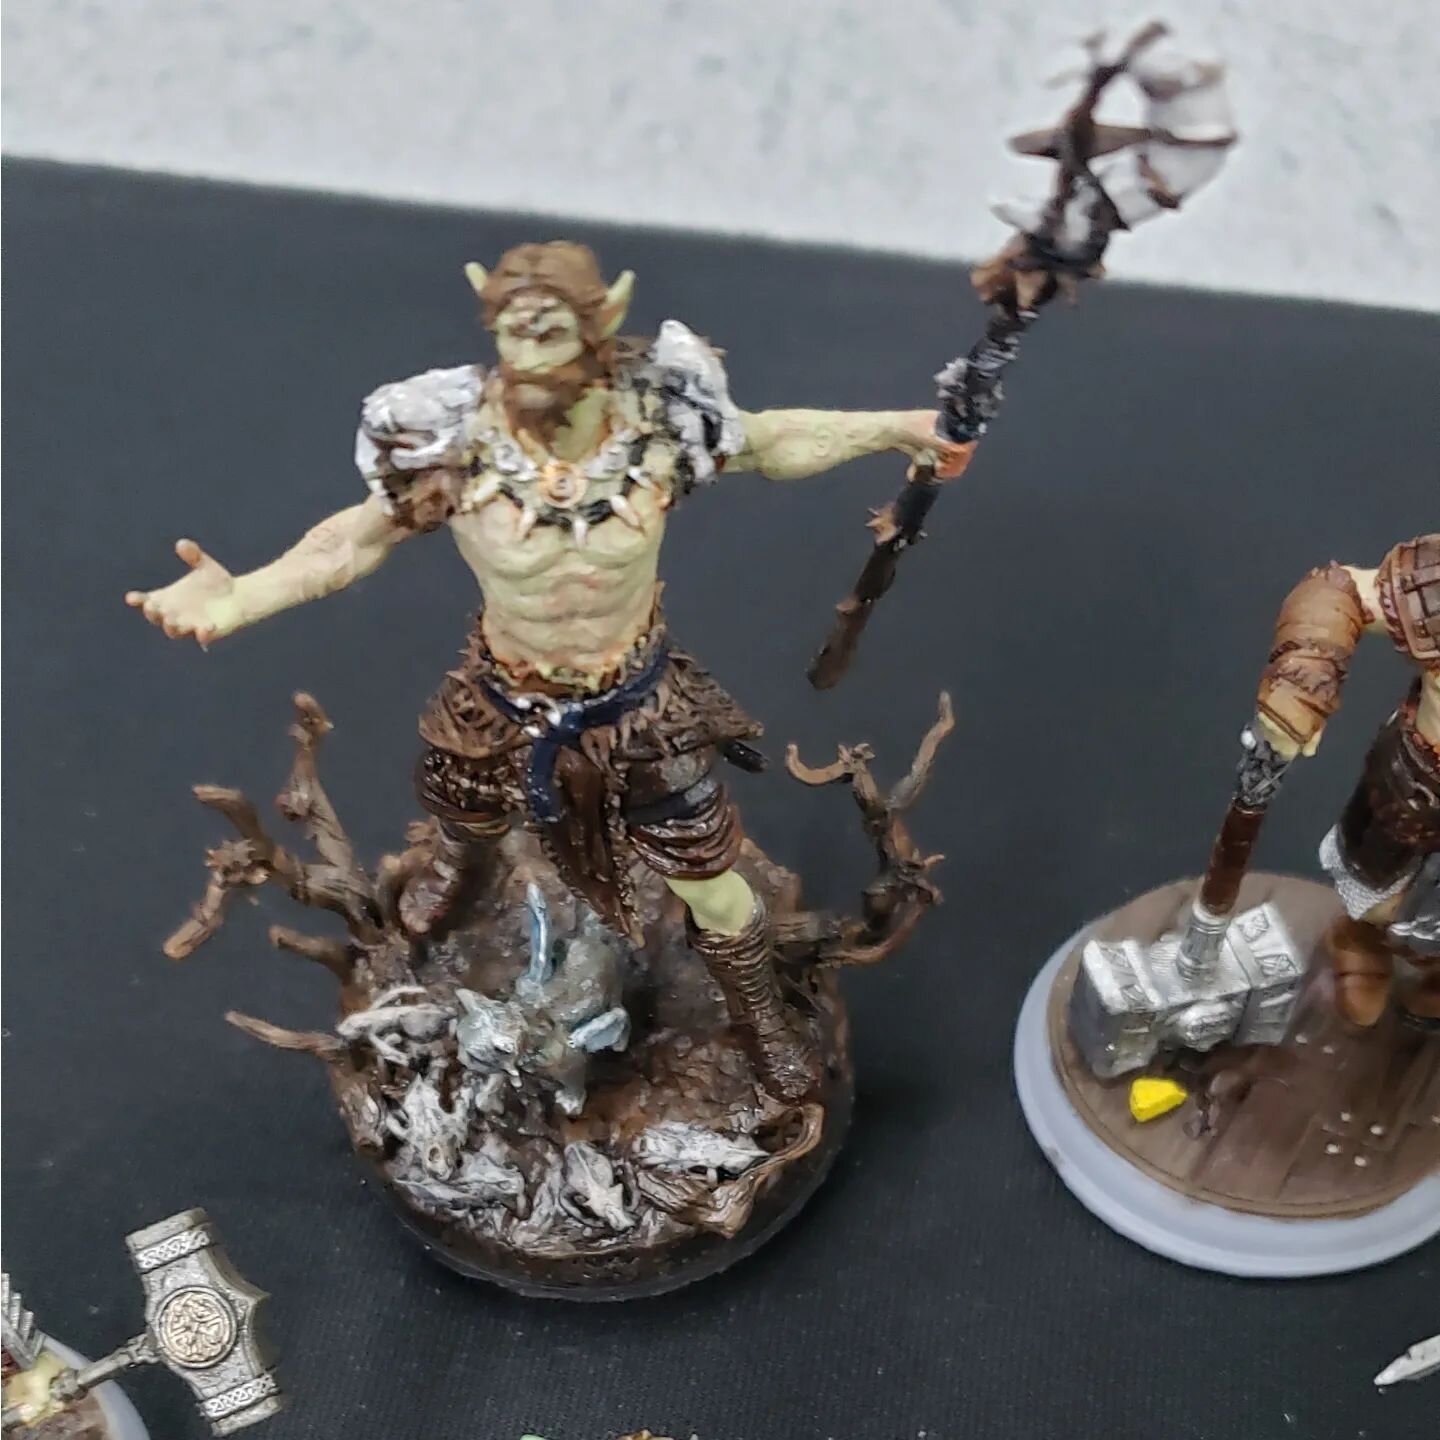 I have been playing d&amp;d for quite a long time. I couldnt find a group to play with as a kid but, my best friend showed me the ropes 15 years ago (maybe more). I have really enjoyed painting minis to add to the d&amp;d group. I paint alot of minis